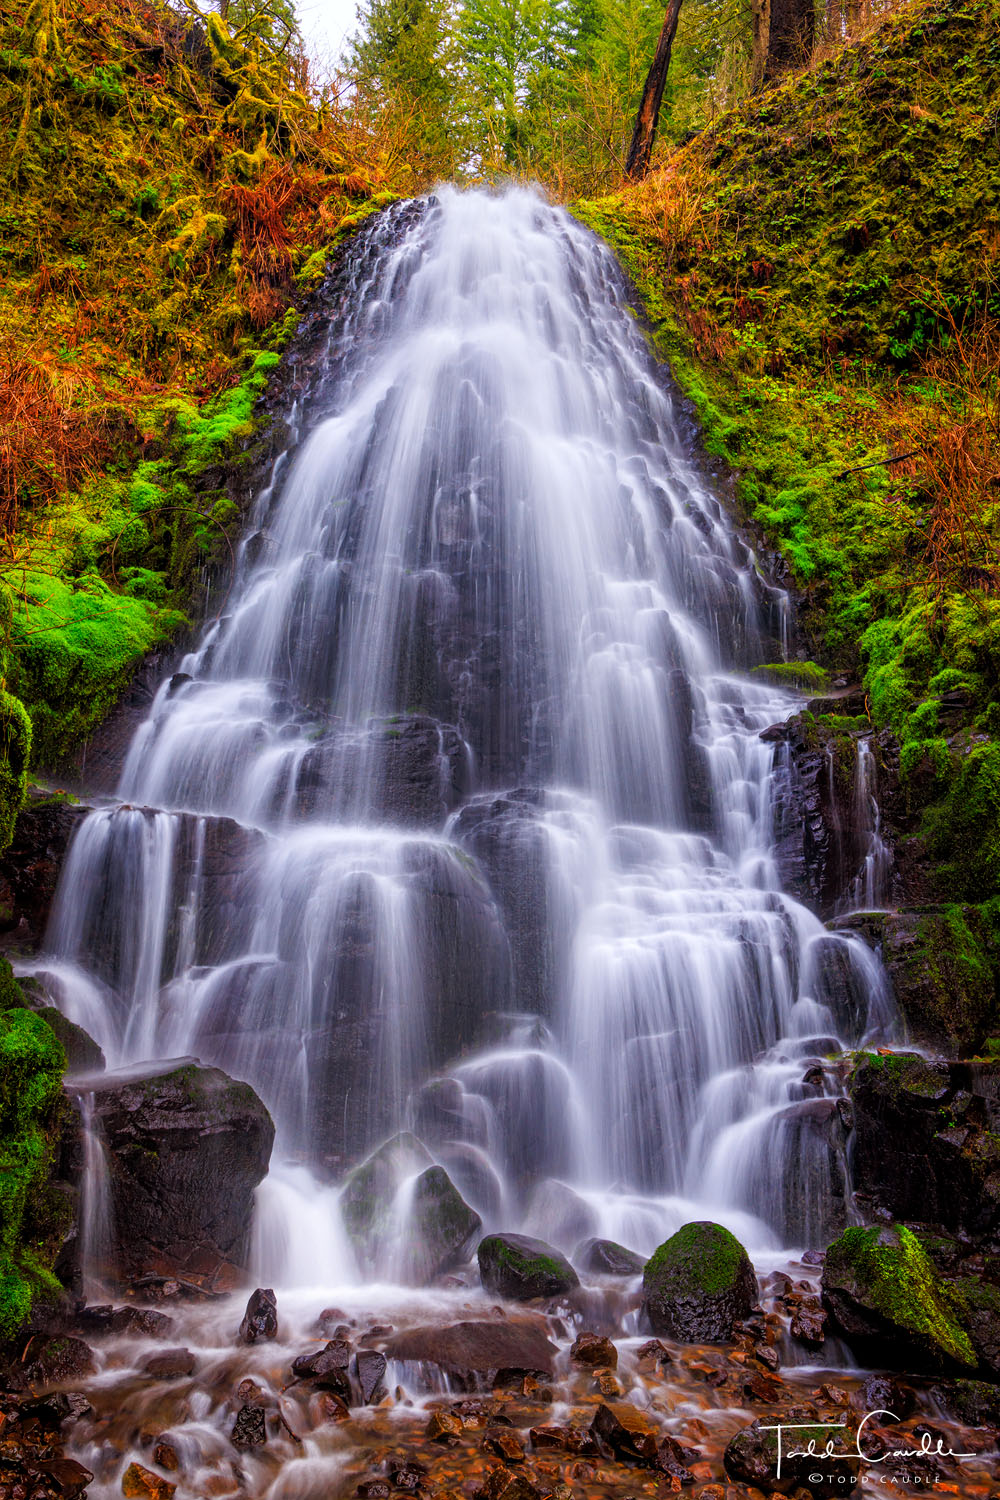 Fairy Falls cascades over a stairstep of rocks in the Columbia River Gorge.